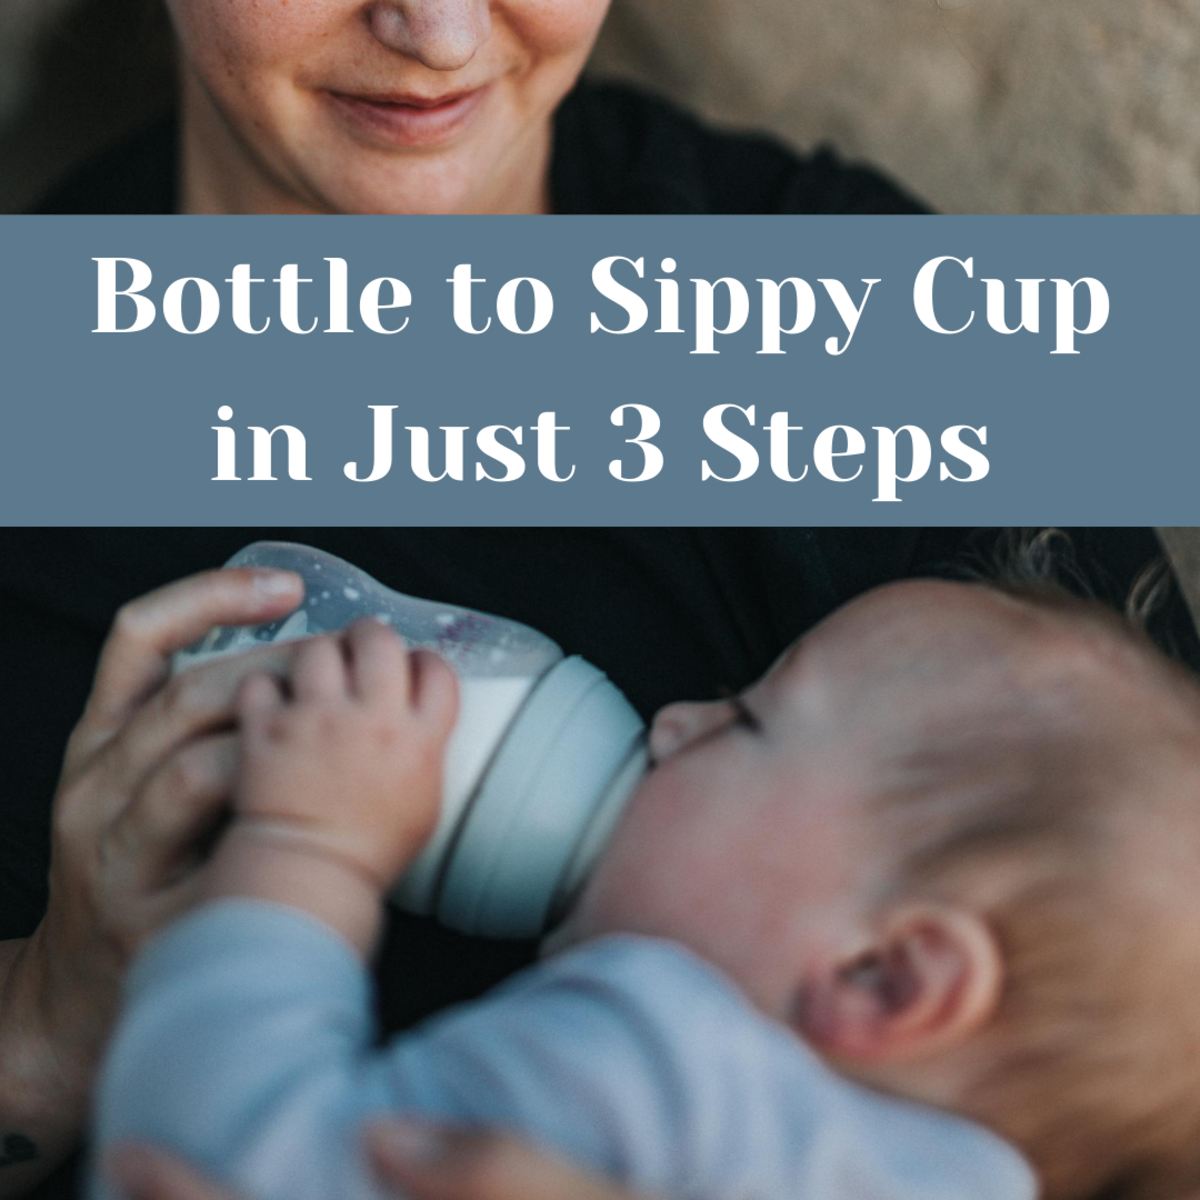 Learn how to make the transition from a bottle to a sippy cup easier for both you and your child. Also, get recommendations on sippy cups to try.